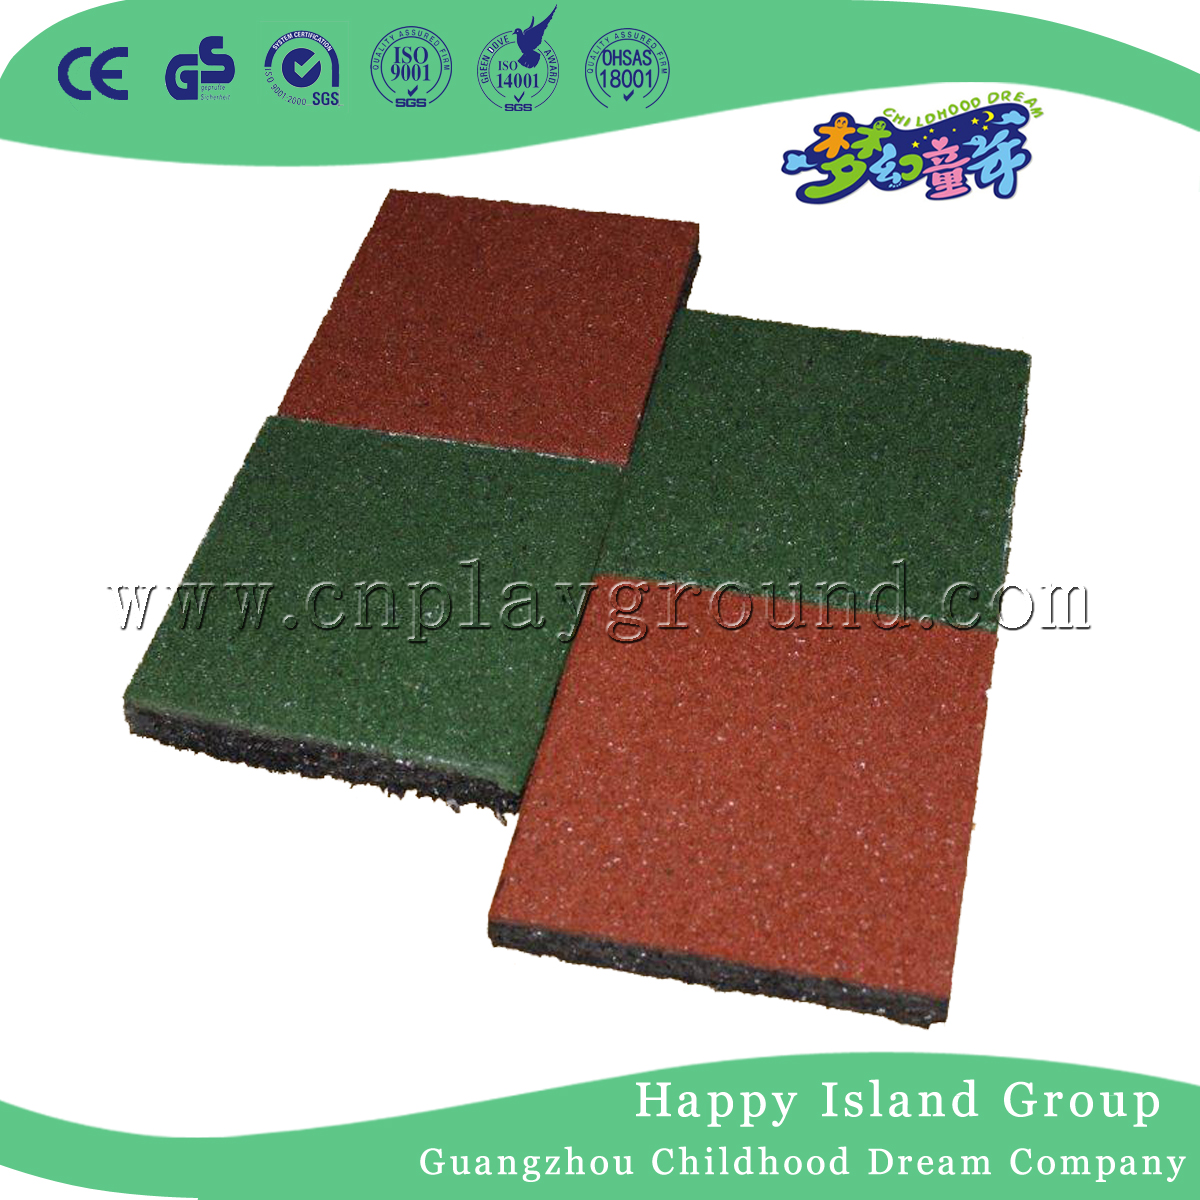 Outdoor Playground Rubber Floor Mats Playground Rubber Tiles on Stock (M11-12401)